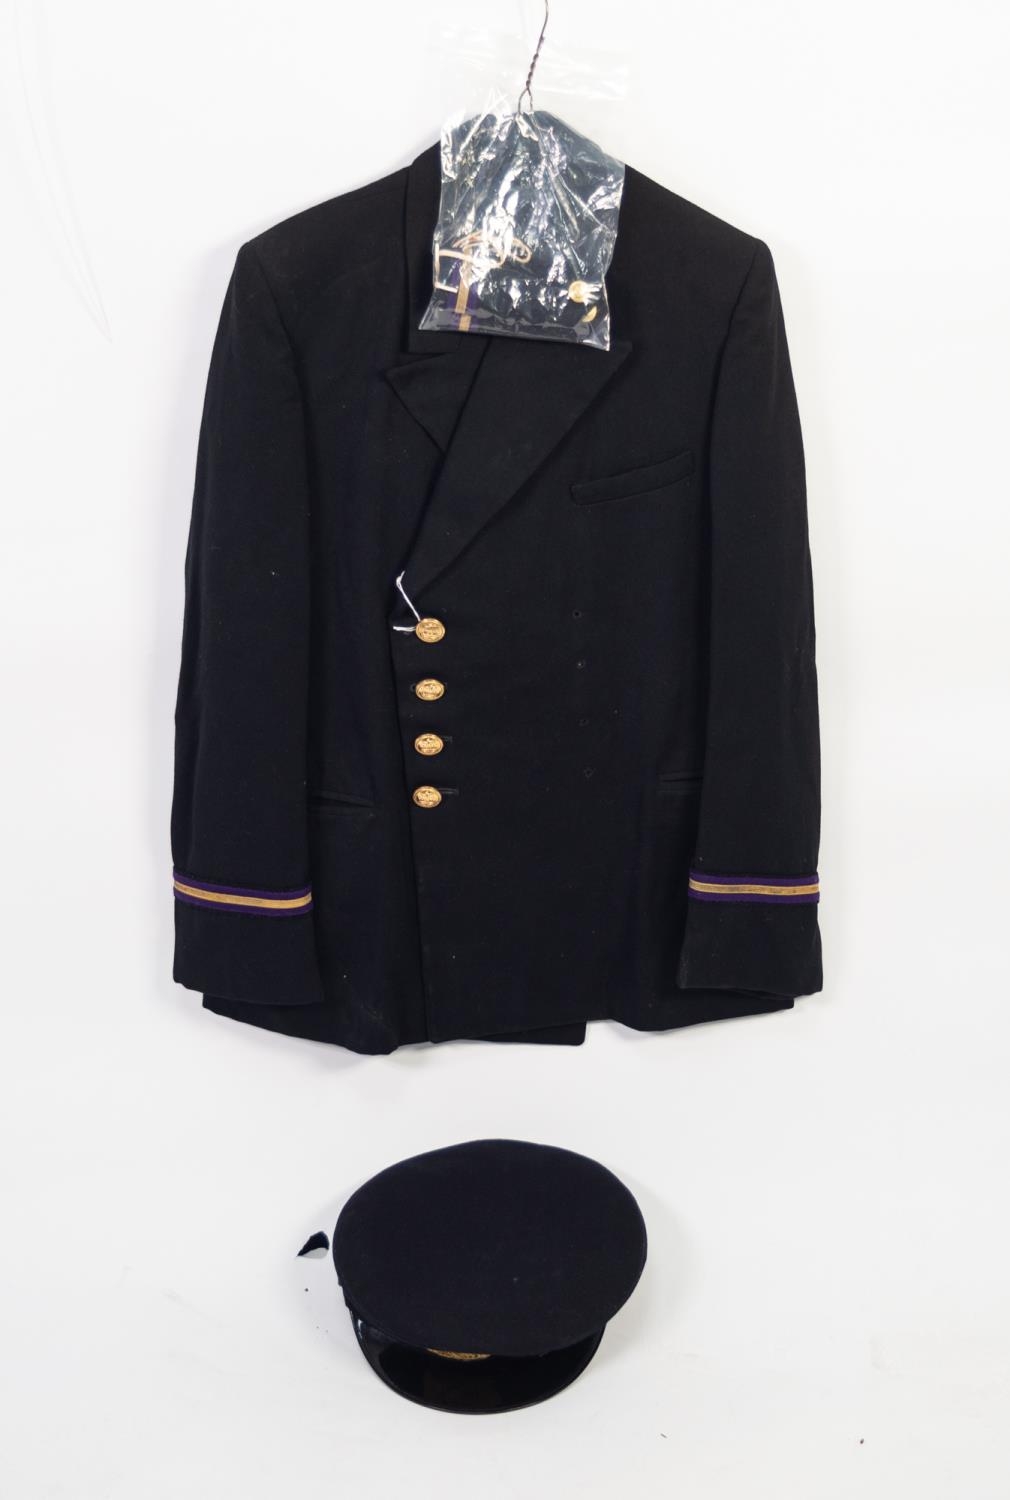 PROBABLY MERCHANT NAVY UNIFORM, the epaulette and arm stripes in purple and gold, viz a cap with